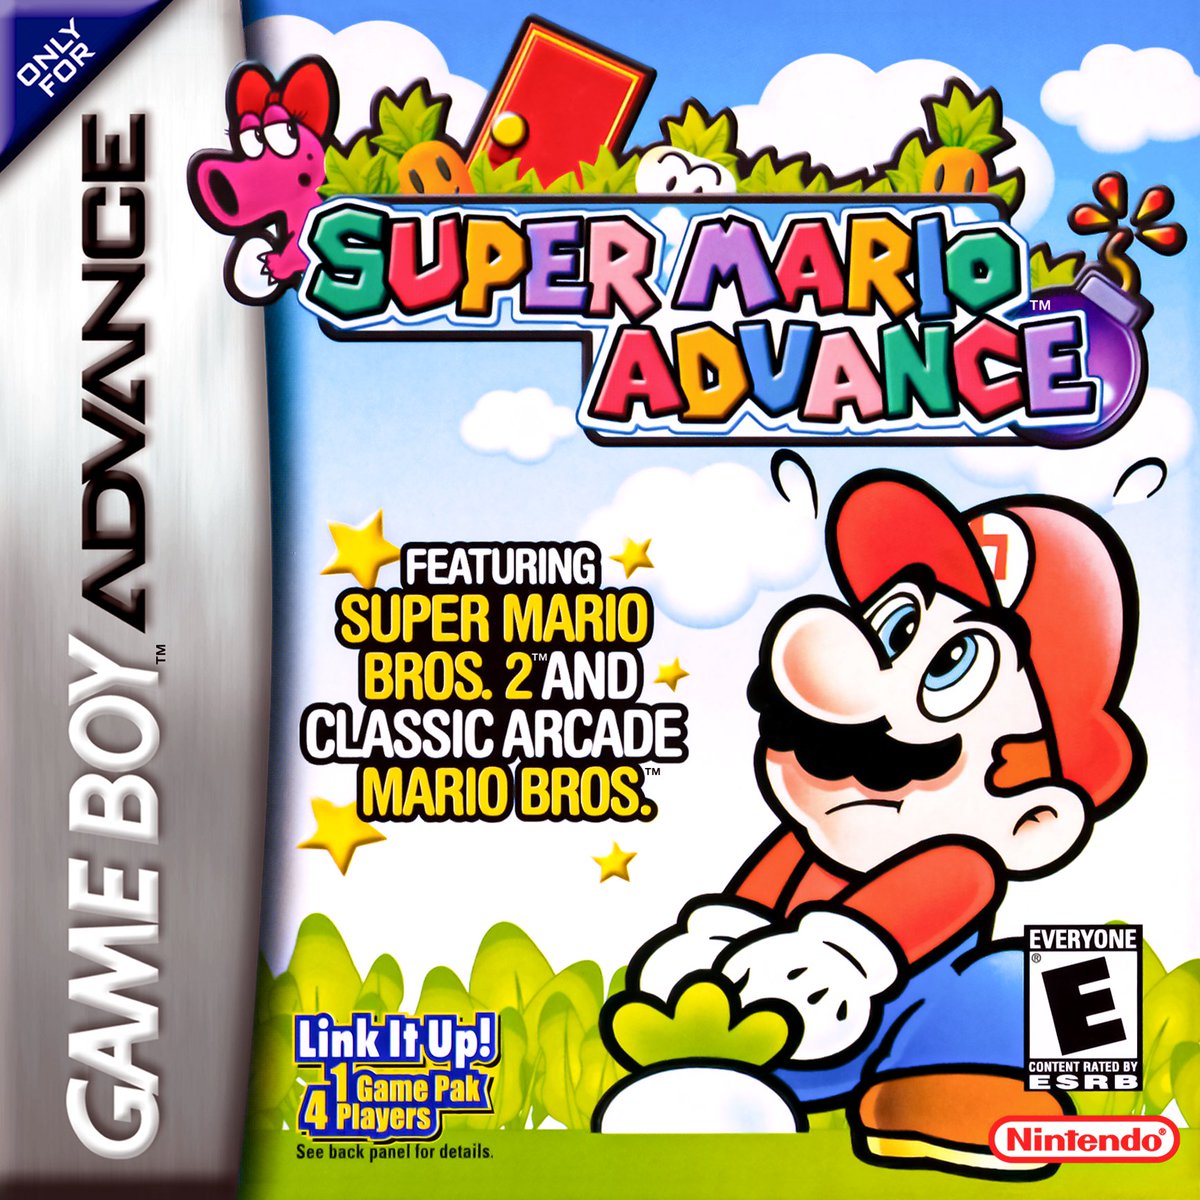 Super Mario Game Boy Advance games added to Nintendo Switch Online